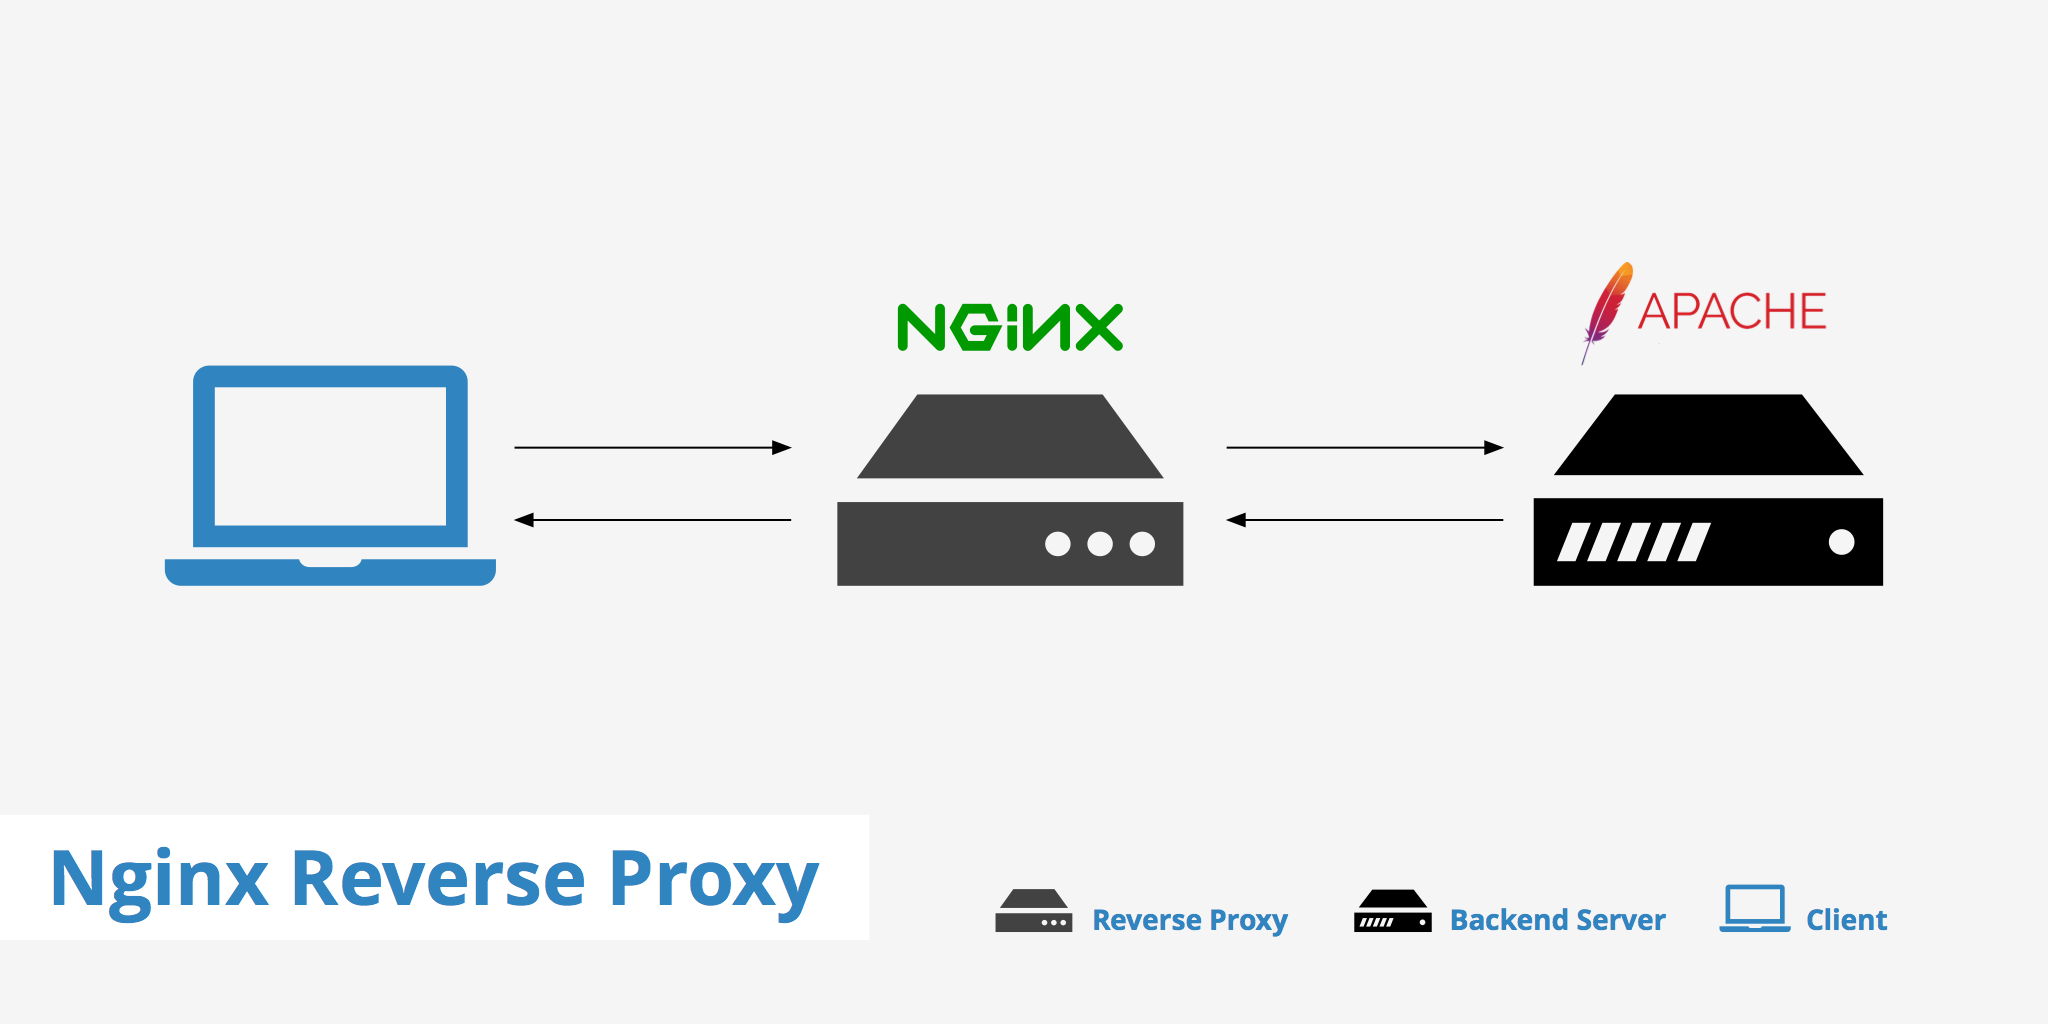 configuring nginx to work with stunnel